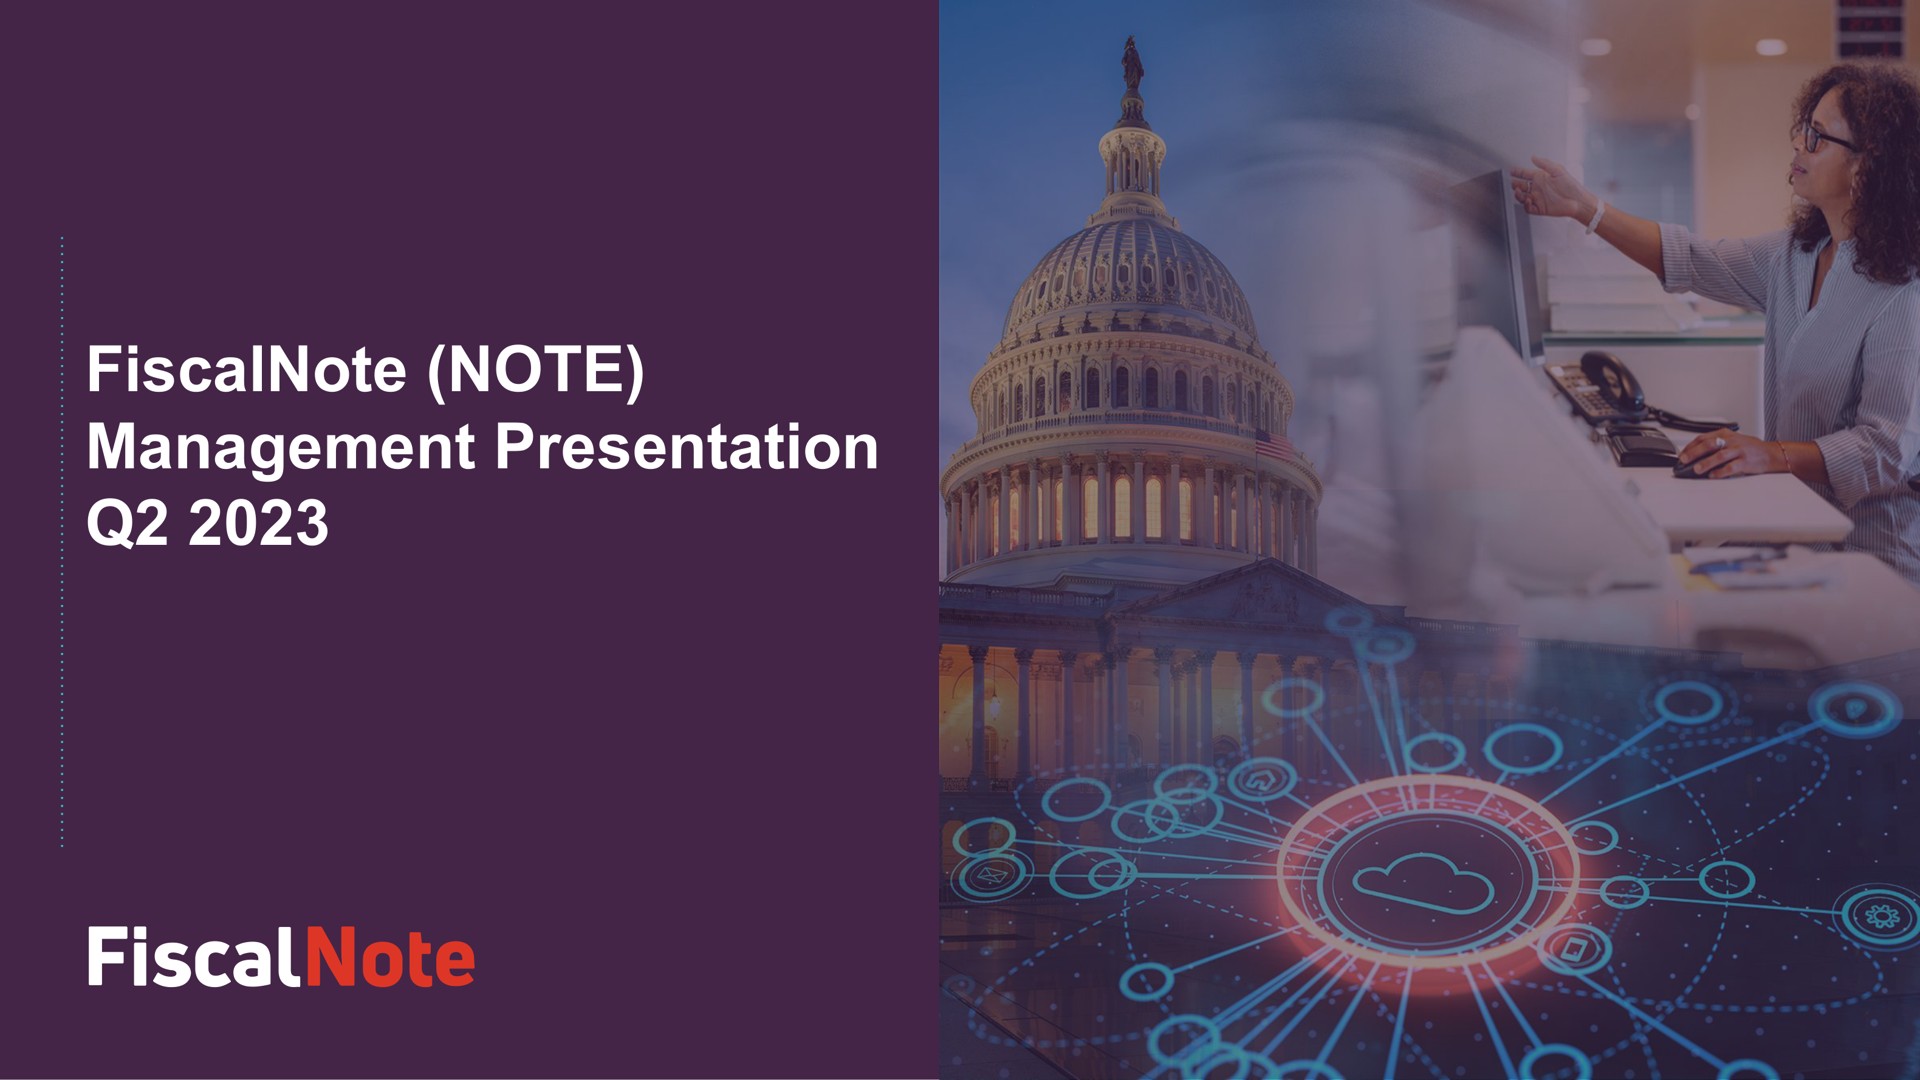 note management presentation fiscal | FiscalNote